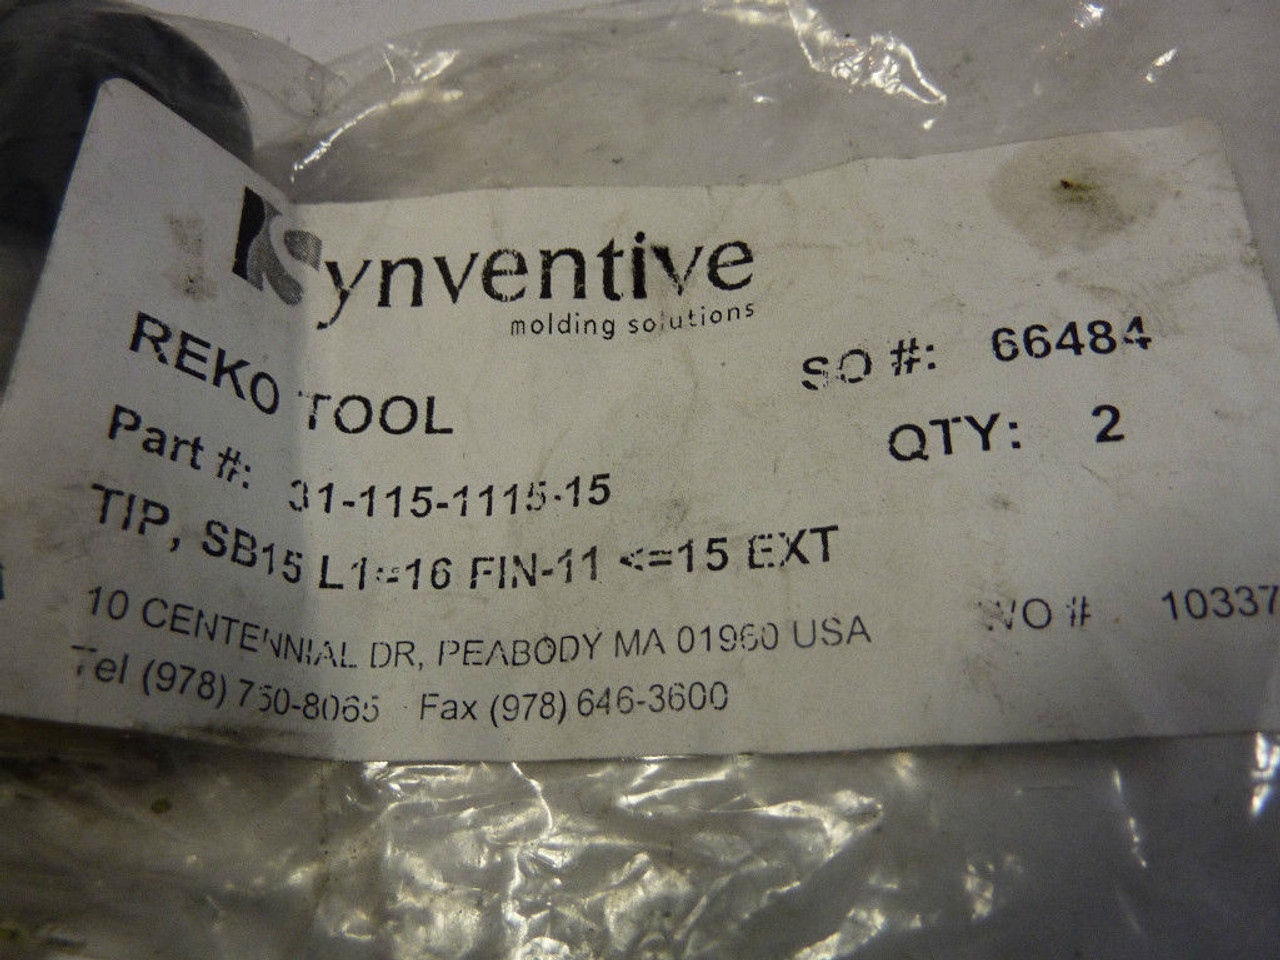 Synventive 31-115-1115-15 Pneumatic Insert Fitting ! NEW !